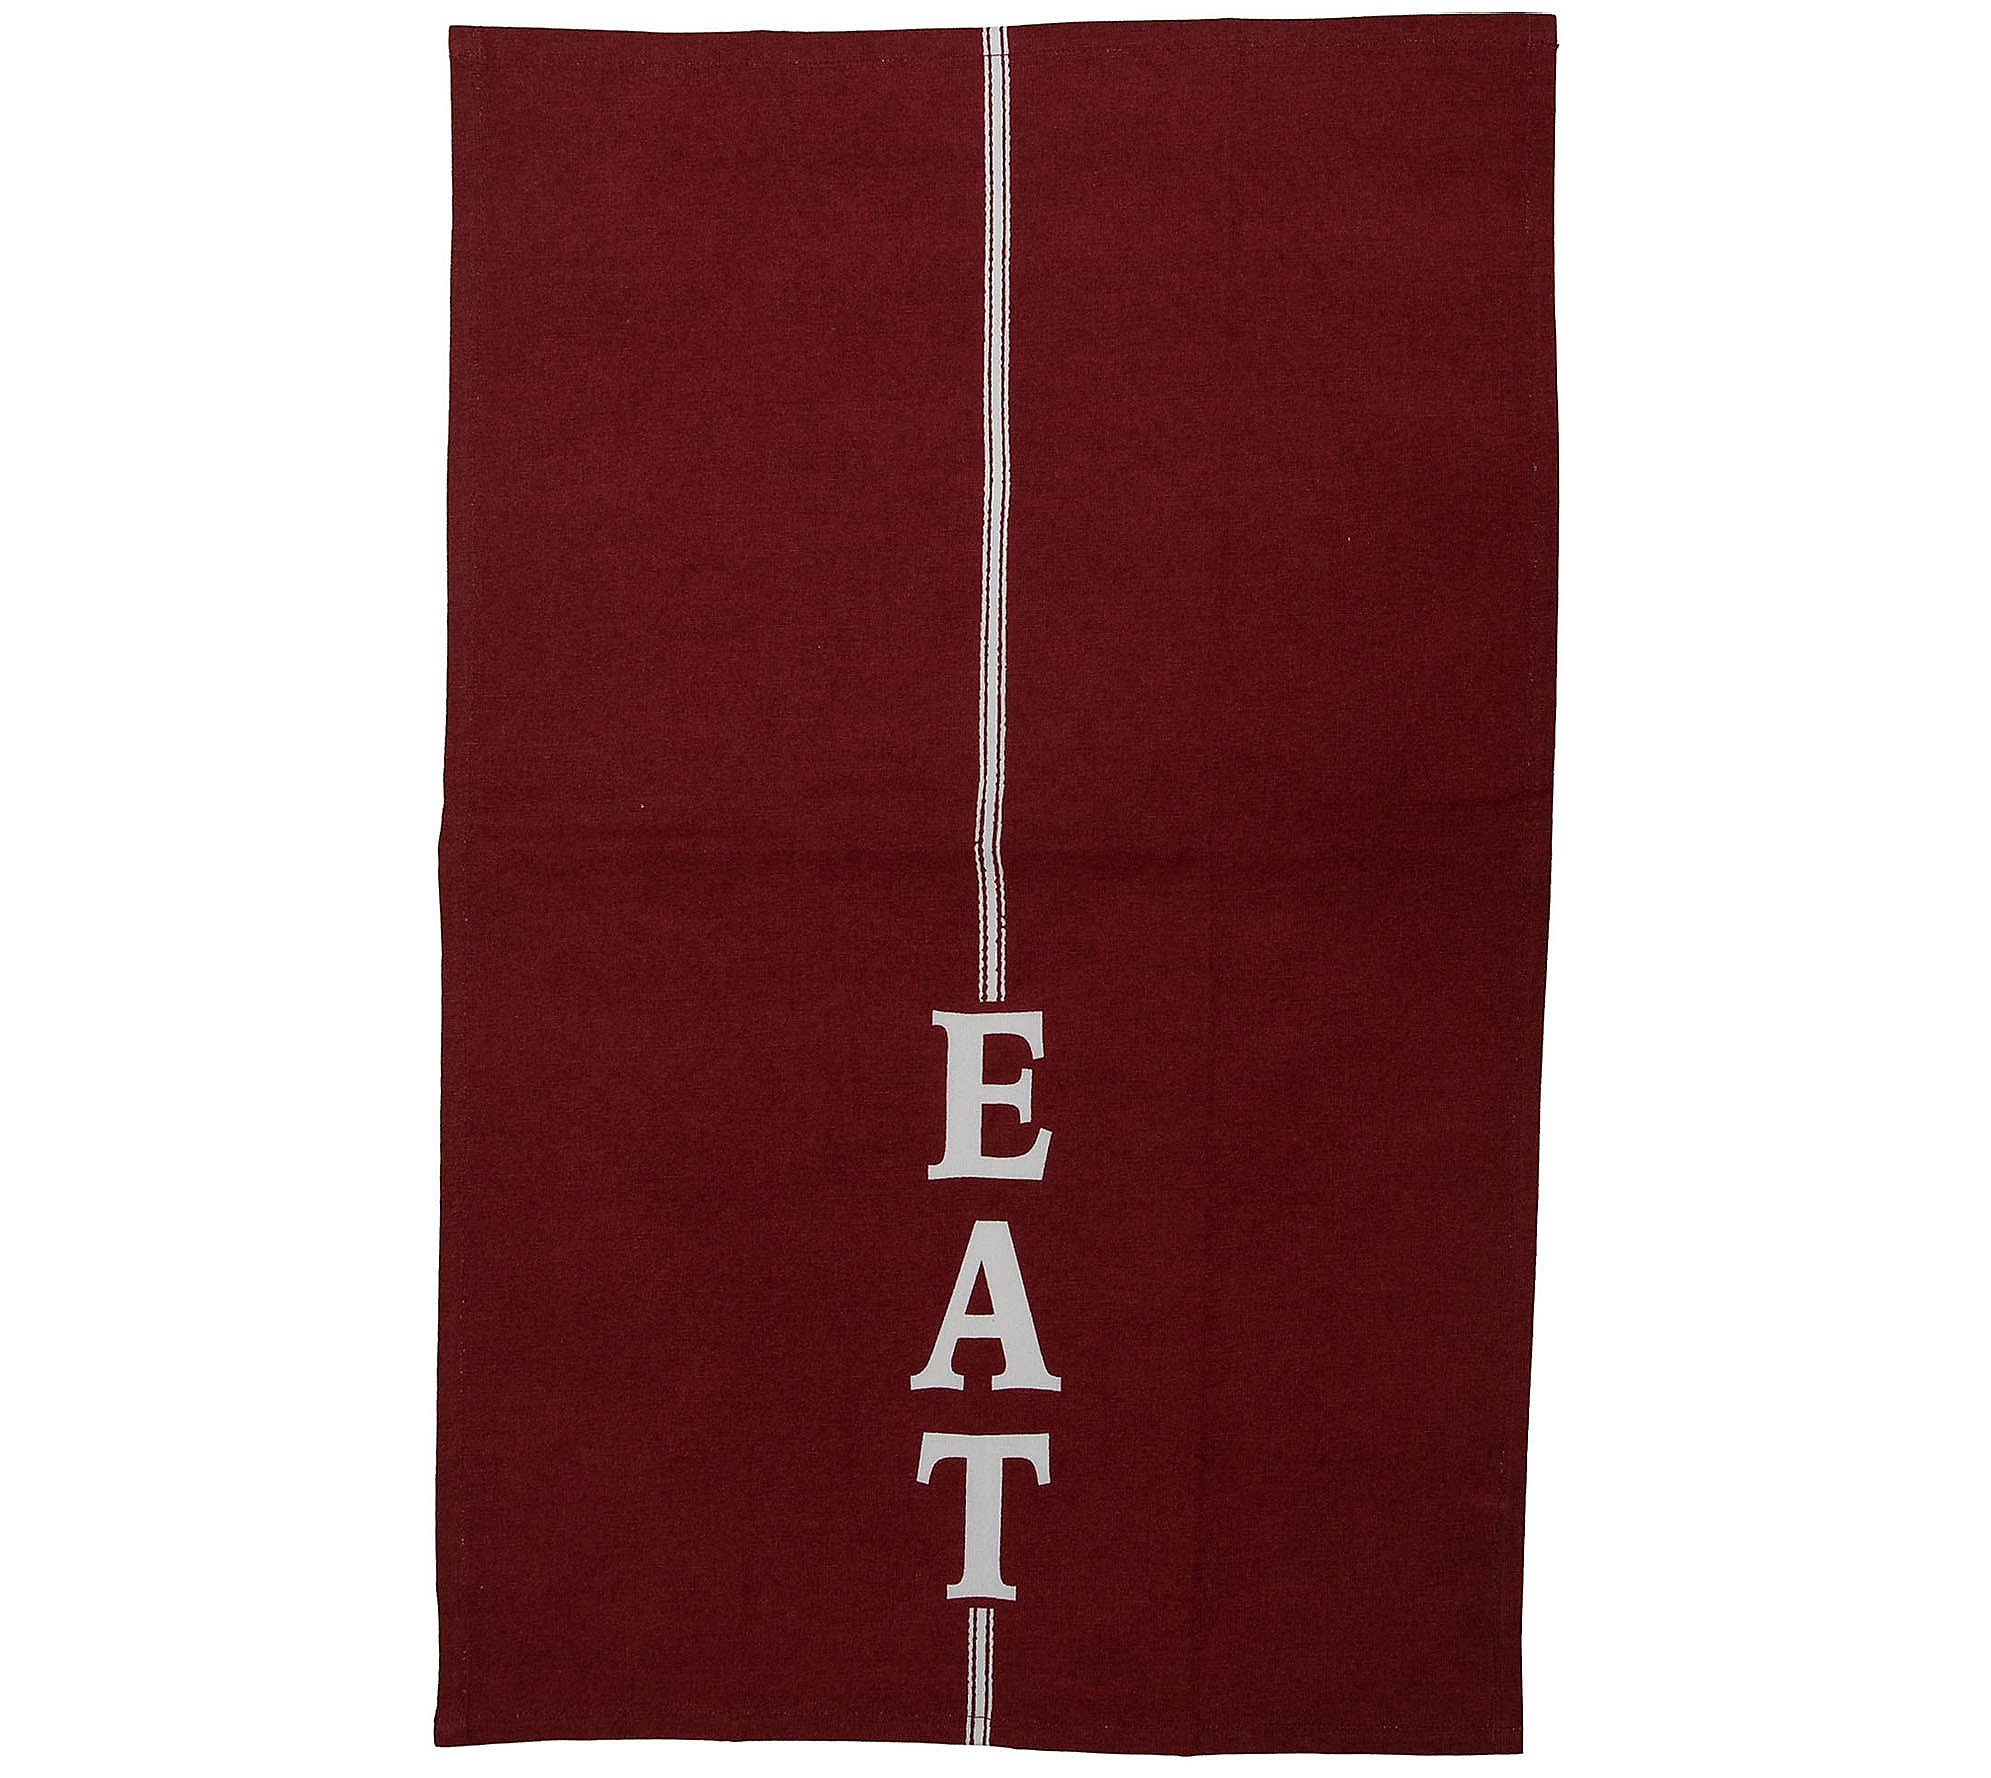 Foreside Home and Garden Set of 3 EAT Tea Towels